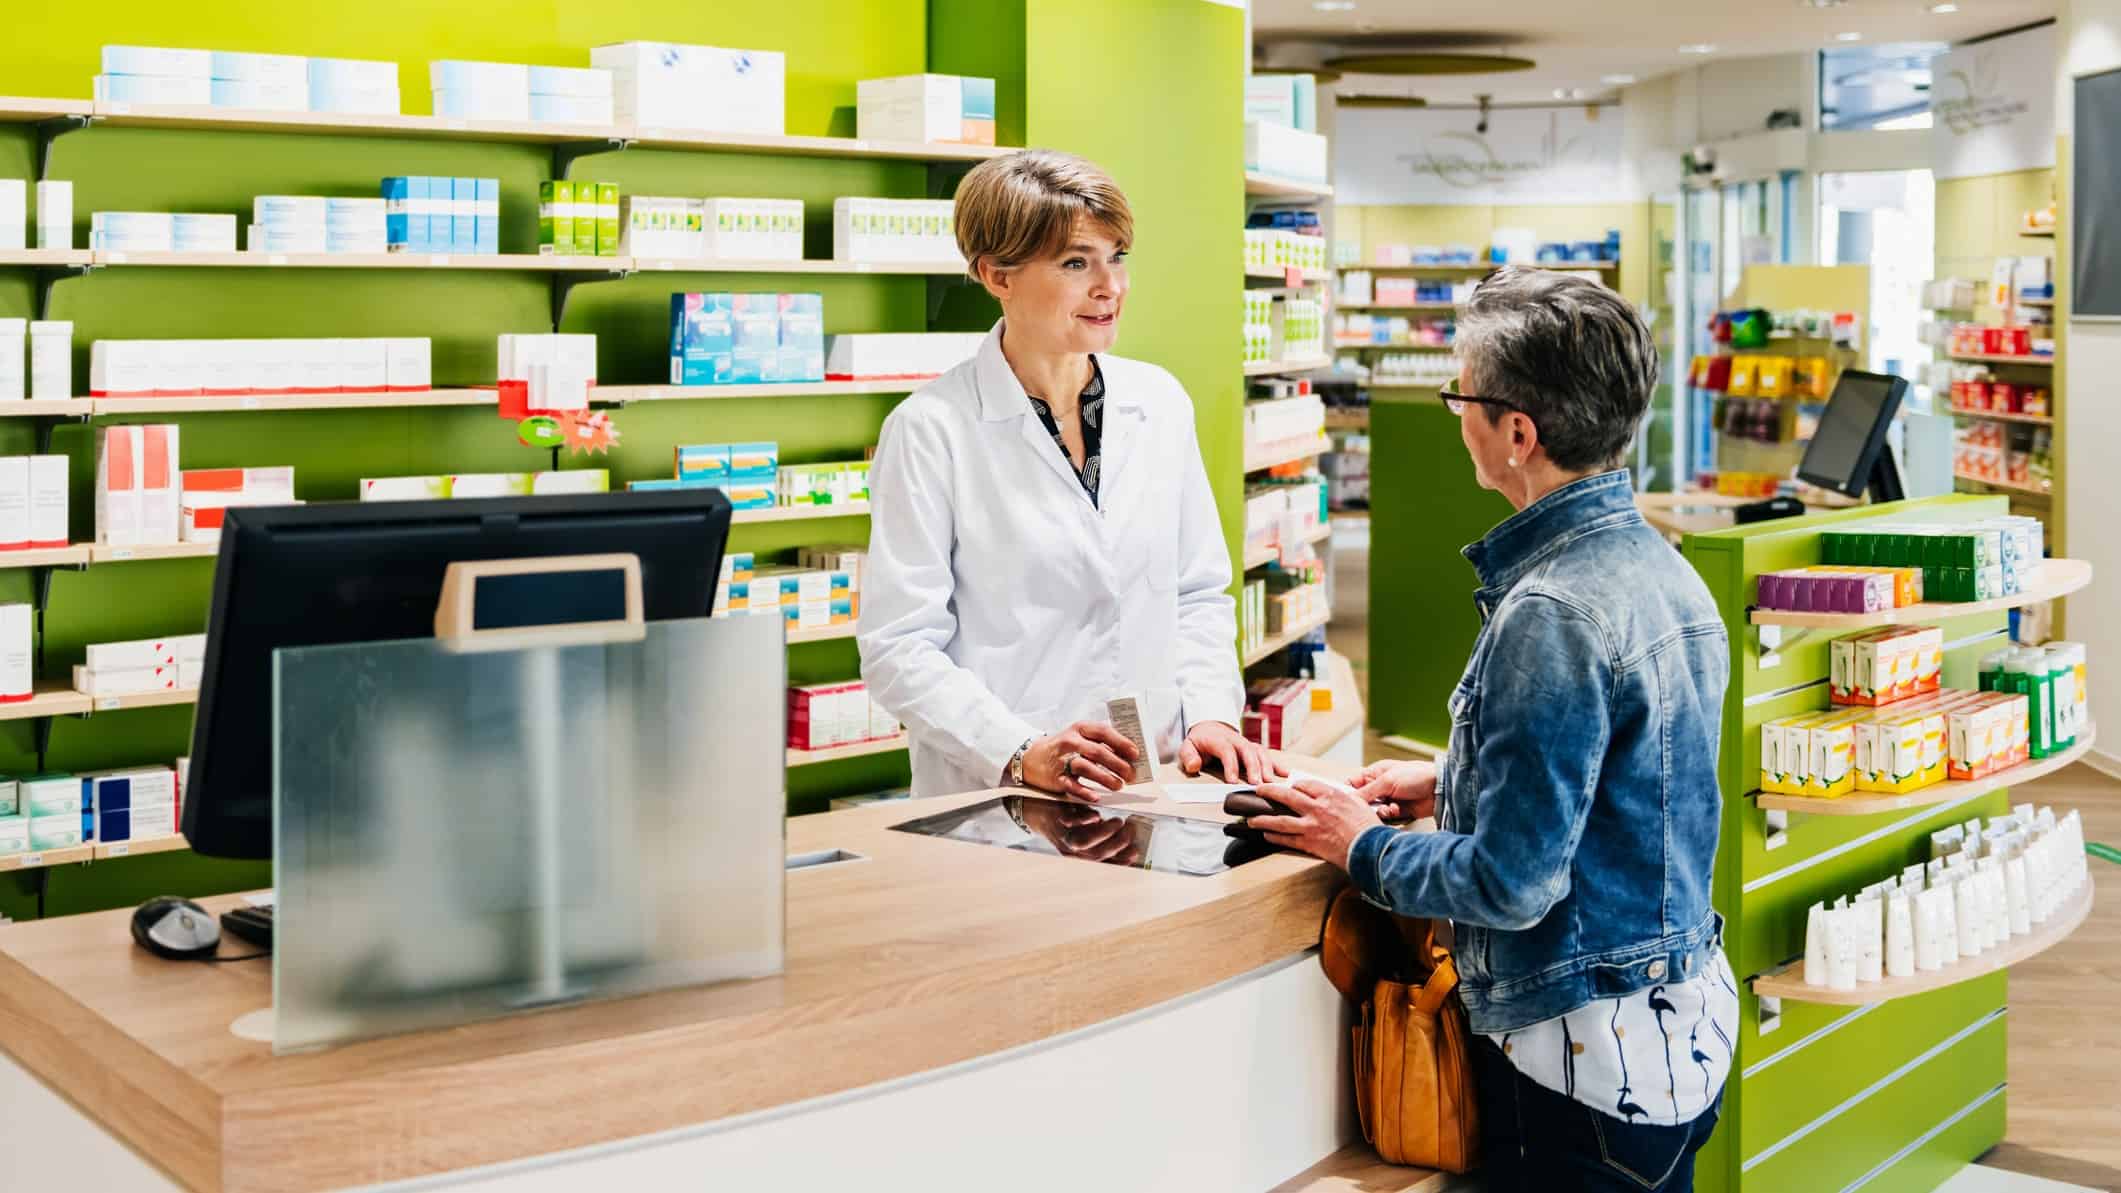 A senior pharmacist talks to a customer at the counter in a shop